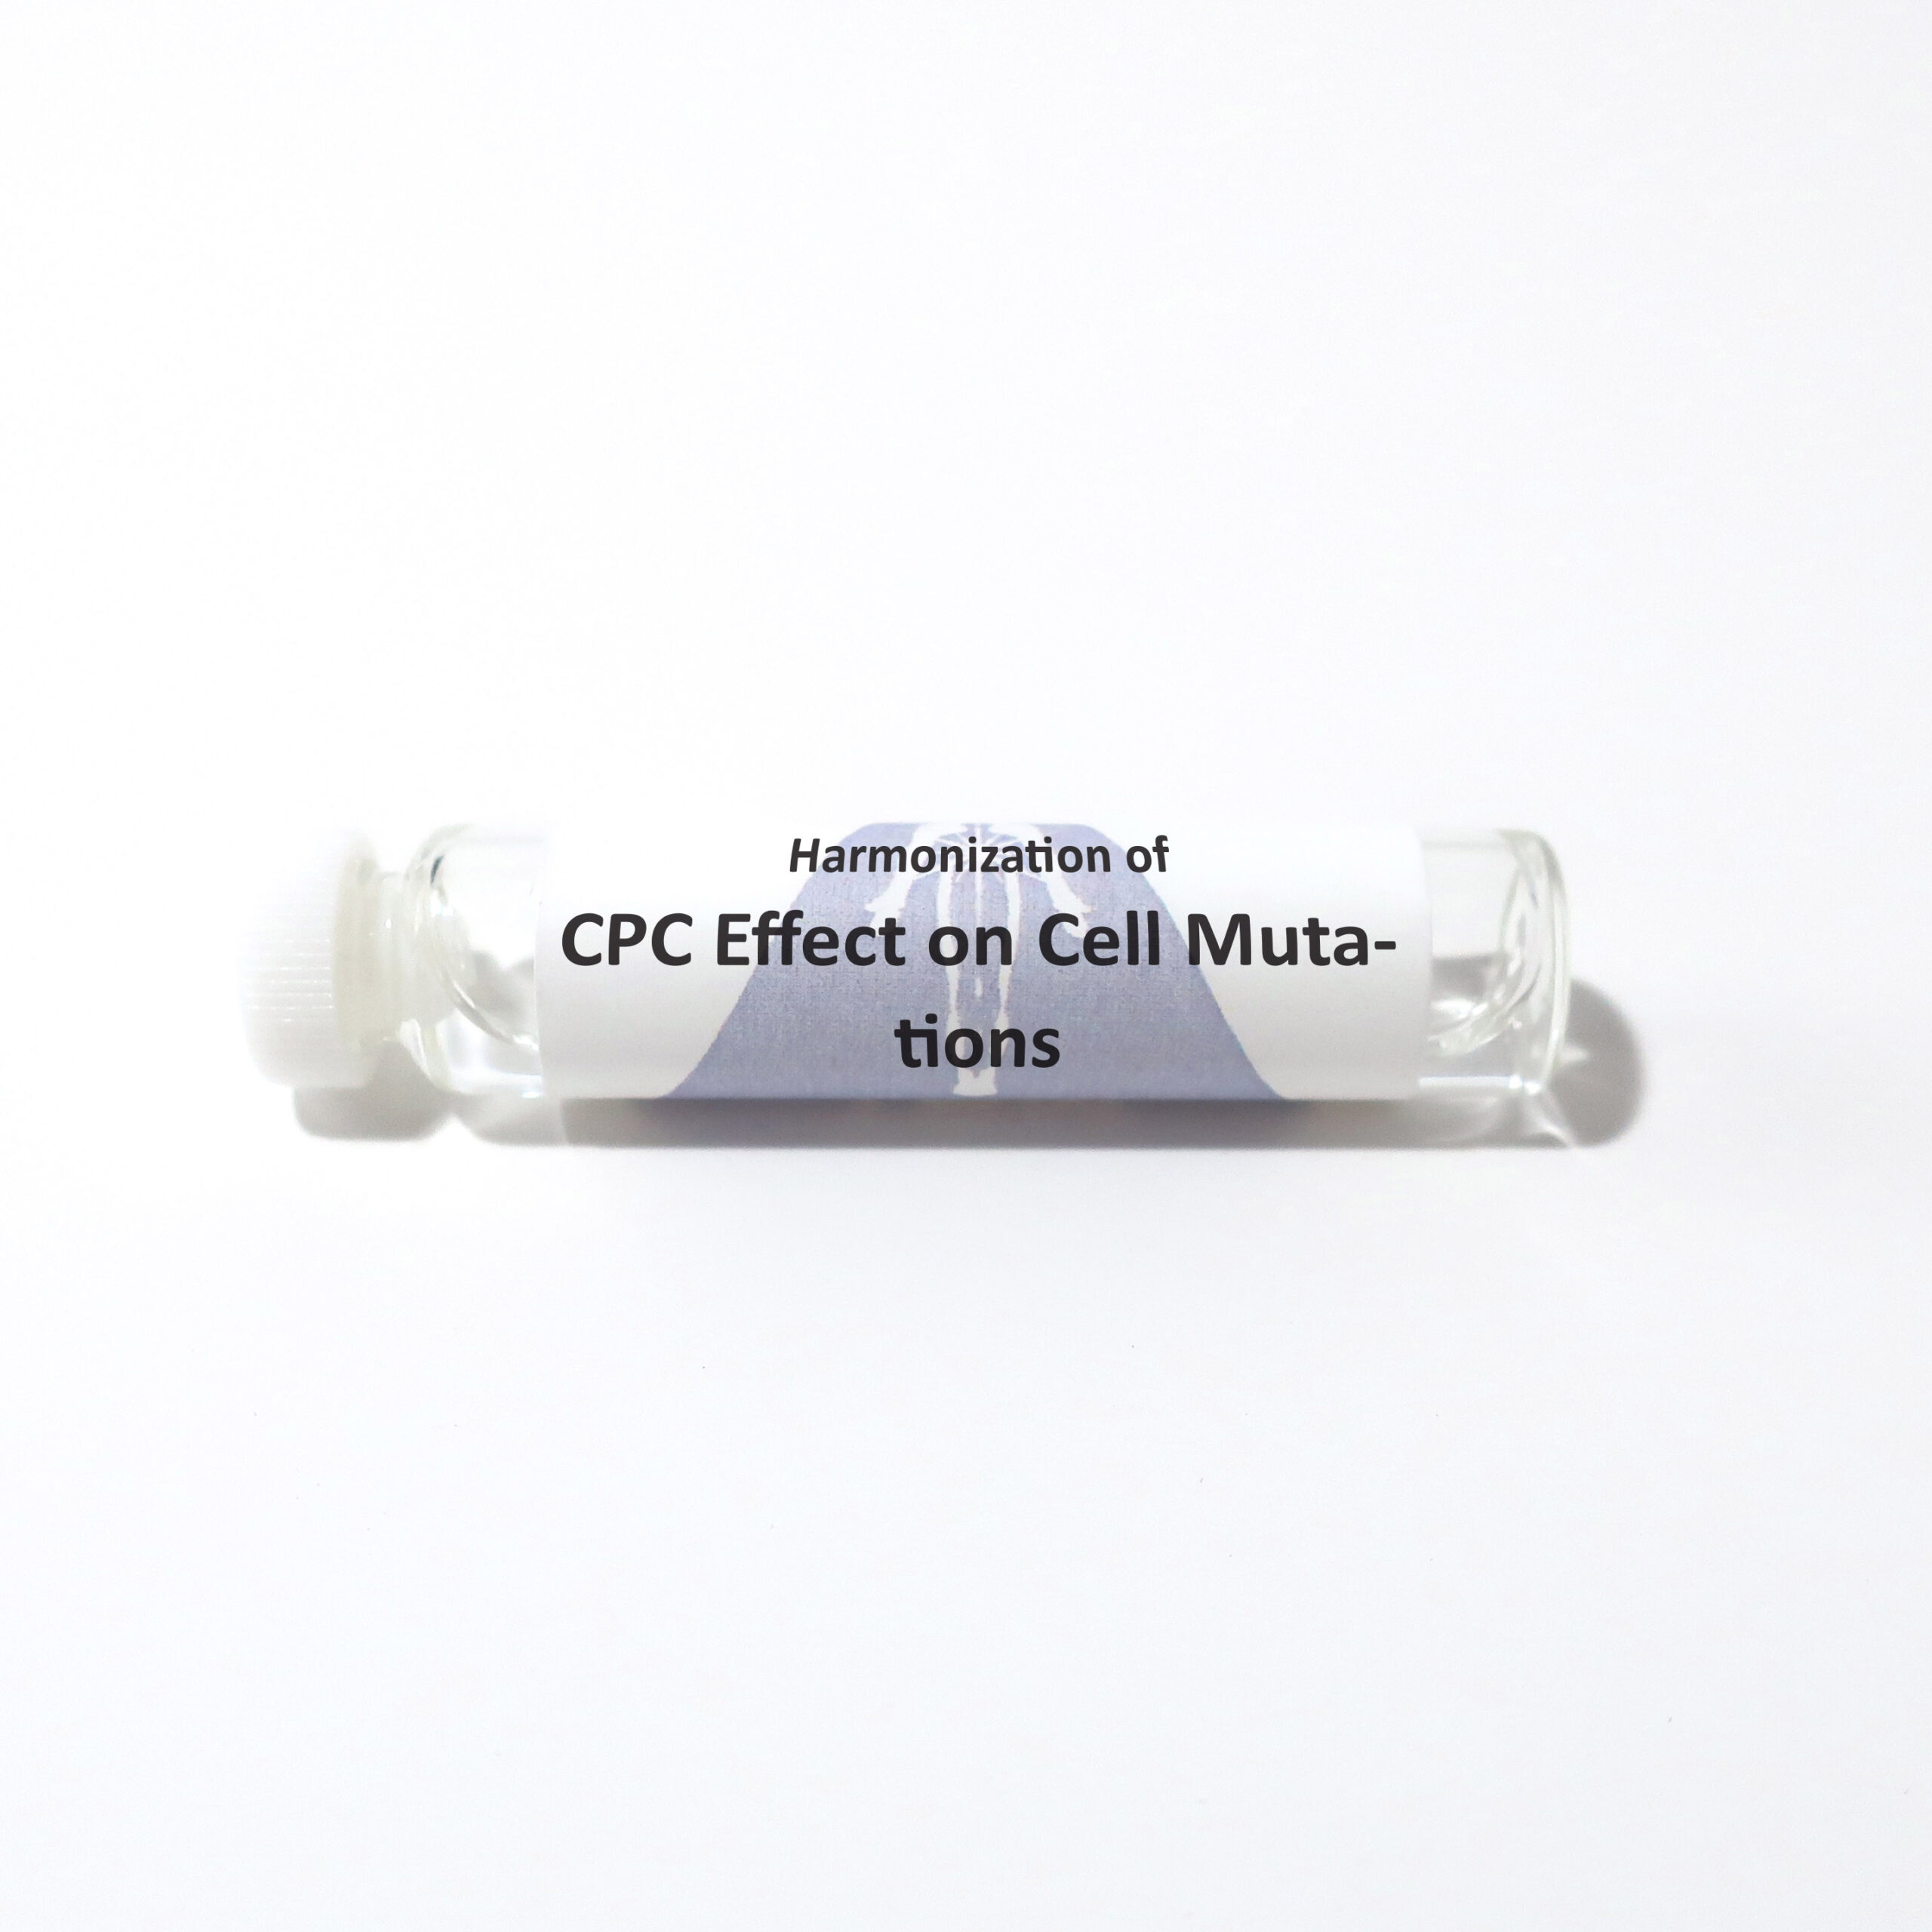 CPC Effect on Cell Mutations